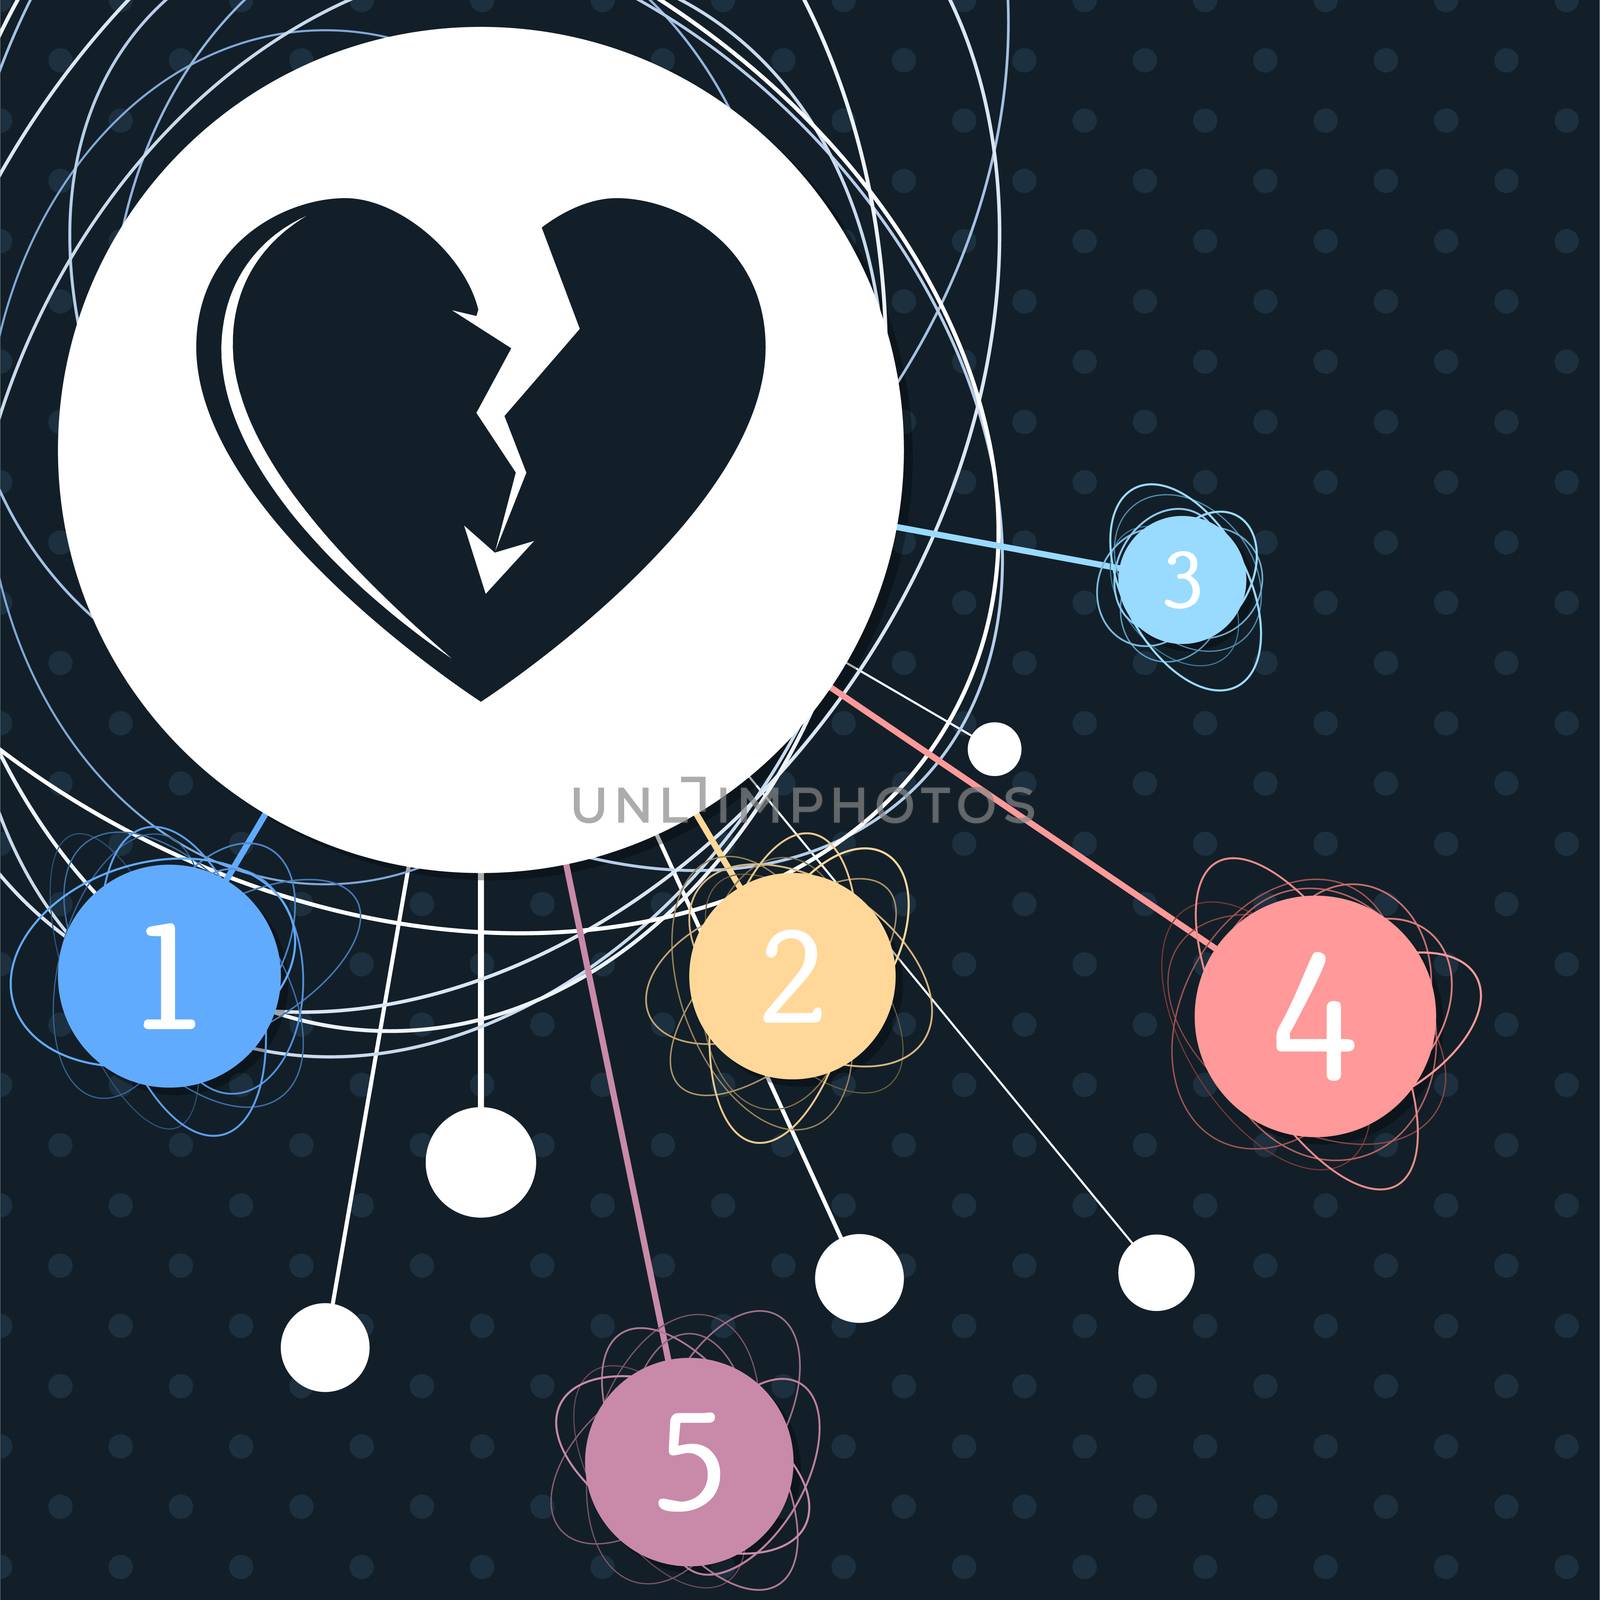 Broken heart icon with the background to the point and with infographic style. illustration